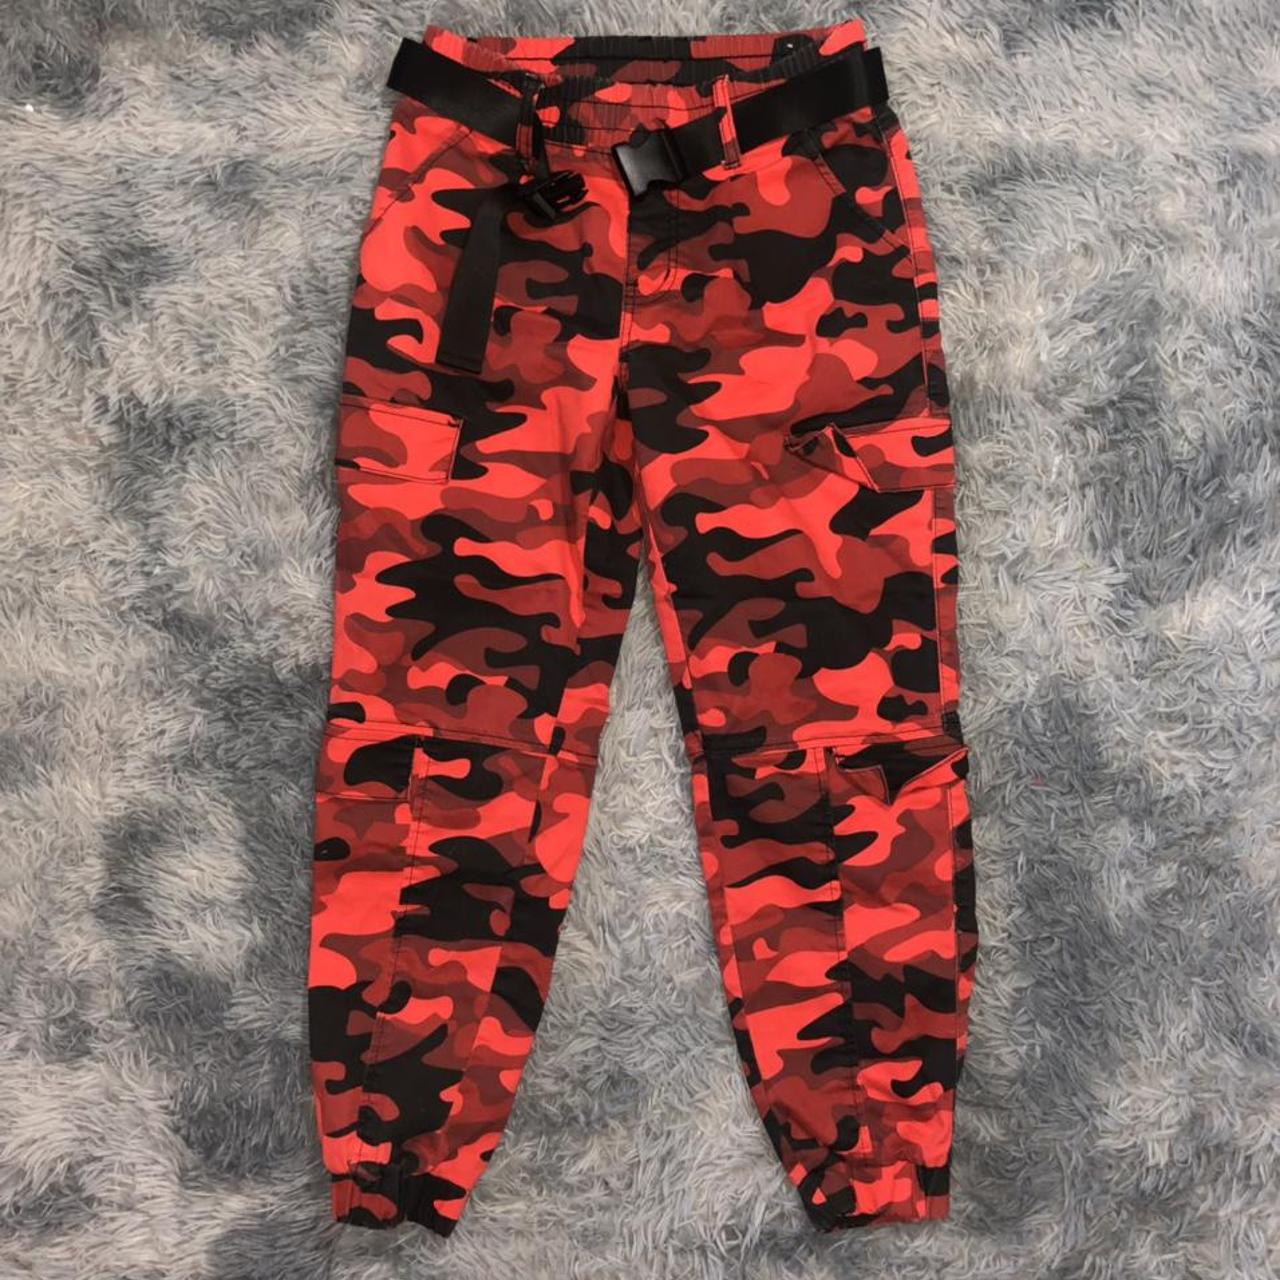 Red and black camo cargo pants. Size 7/28, in great... - Depop